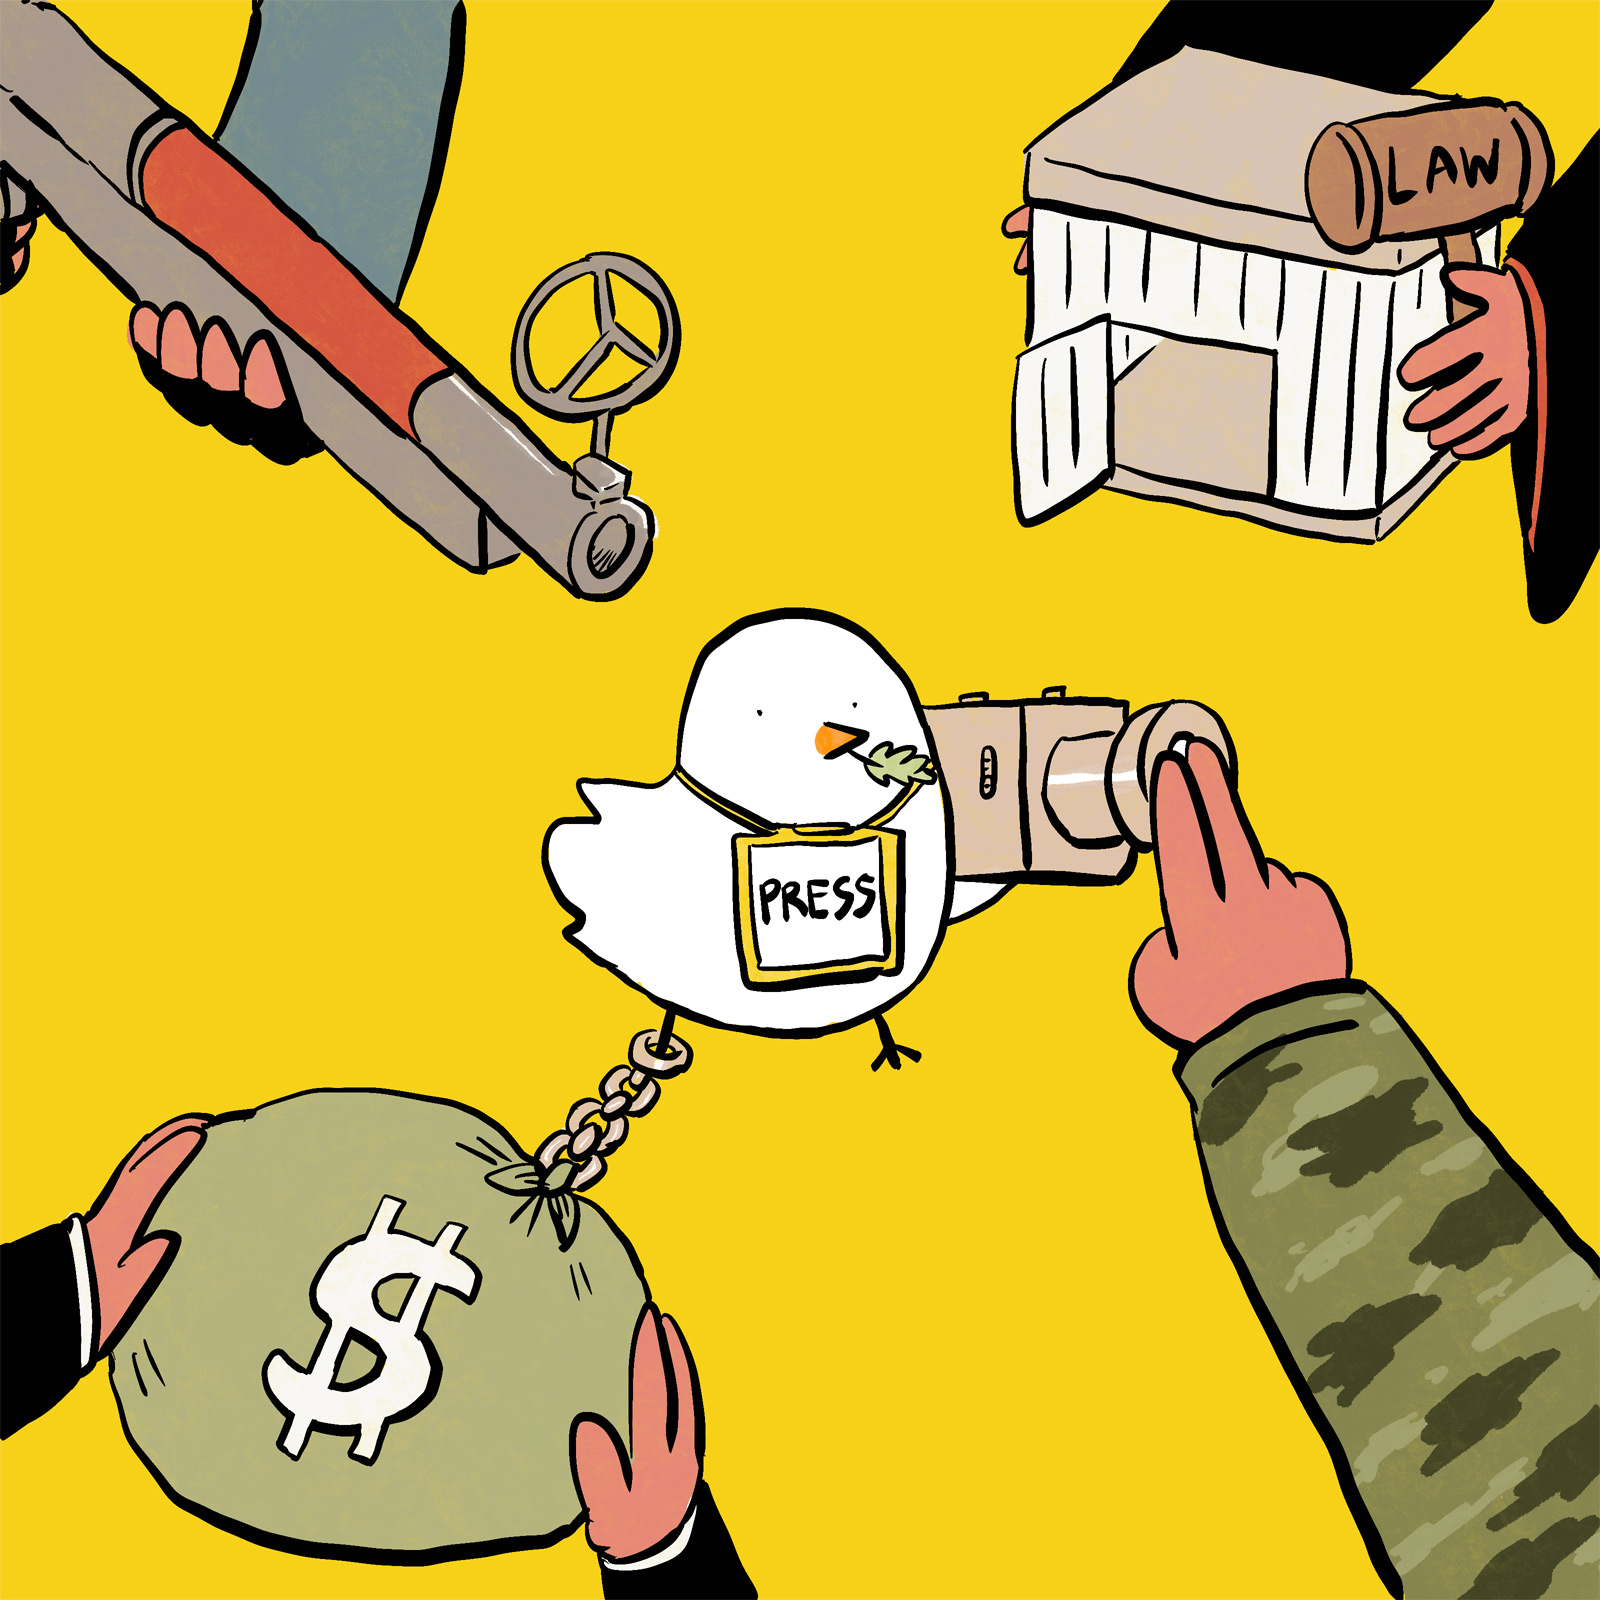 A white bird with a leaf in its mouth stands in the middle of a yellow background, wearing a press tag around its neck. It holds up a video camera. Four hands extend from the four corners of the image towards it. One hand points a rifle at the bird; the shape of the viewfinder on the rifle is similar to that of the peace symbol. Another hand holds a birdcage and a gavel with the word ‘Law’ written on it. A third hand holds a bag of money, which is chained to the bird’s leg like a weight. The fourth hand, belonging to a person wearing army camouflage patterns, covers the lens of the bird’s video camera.